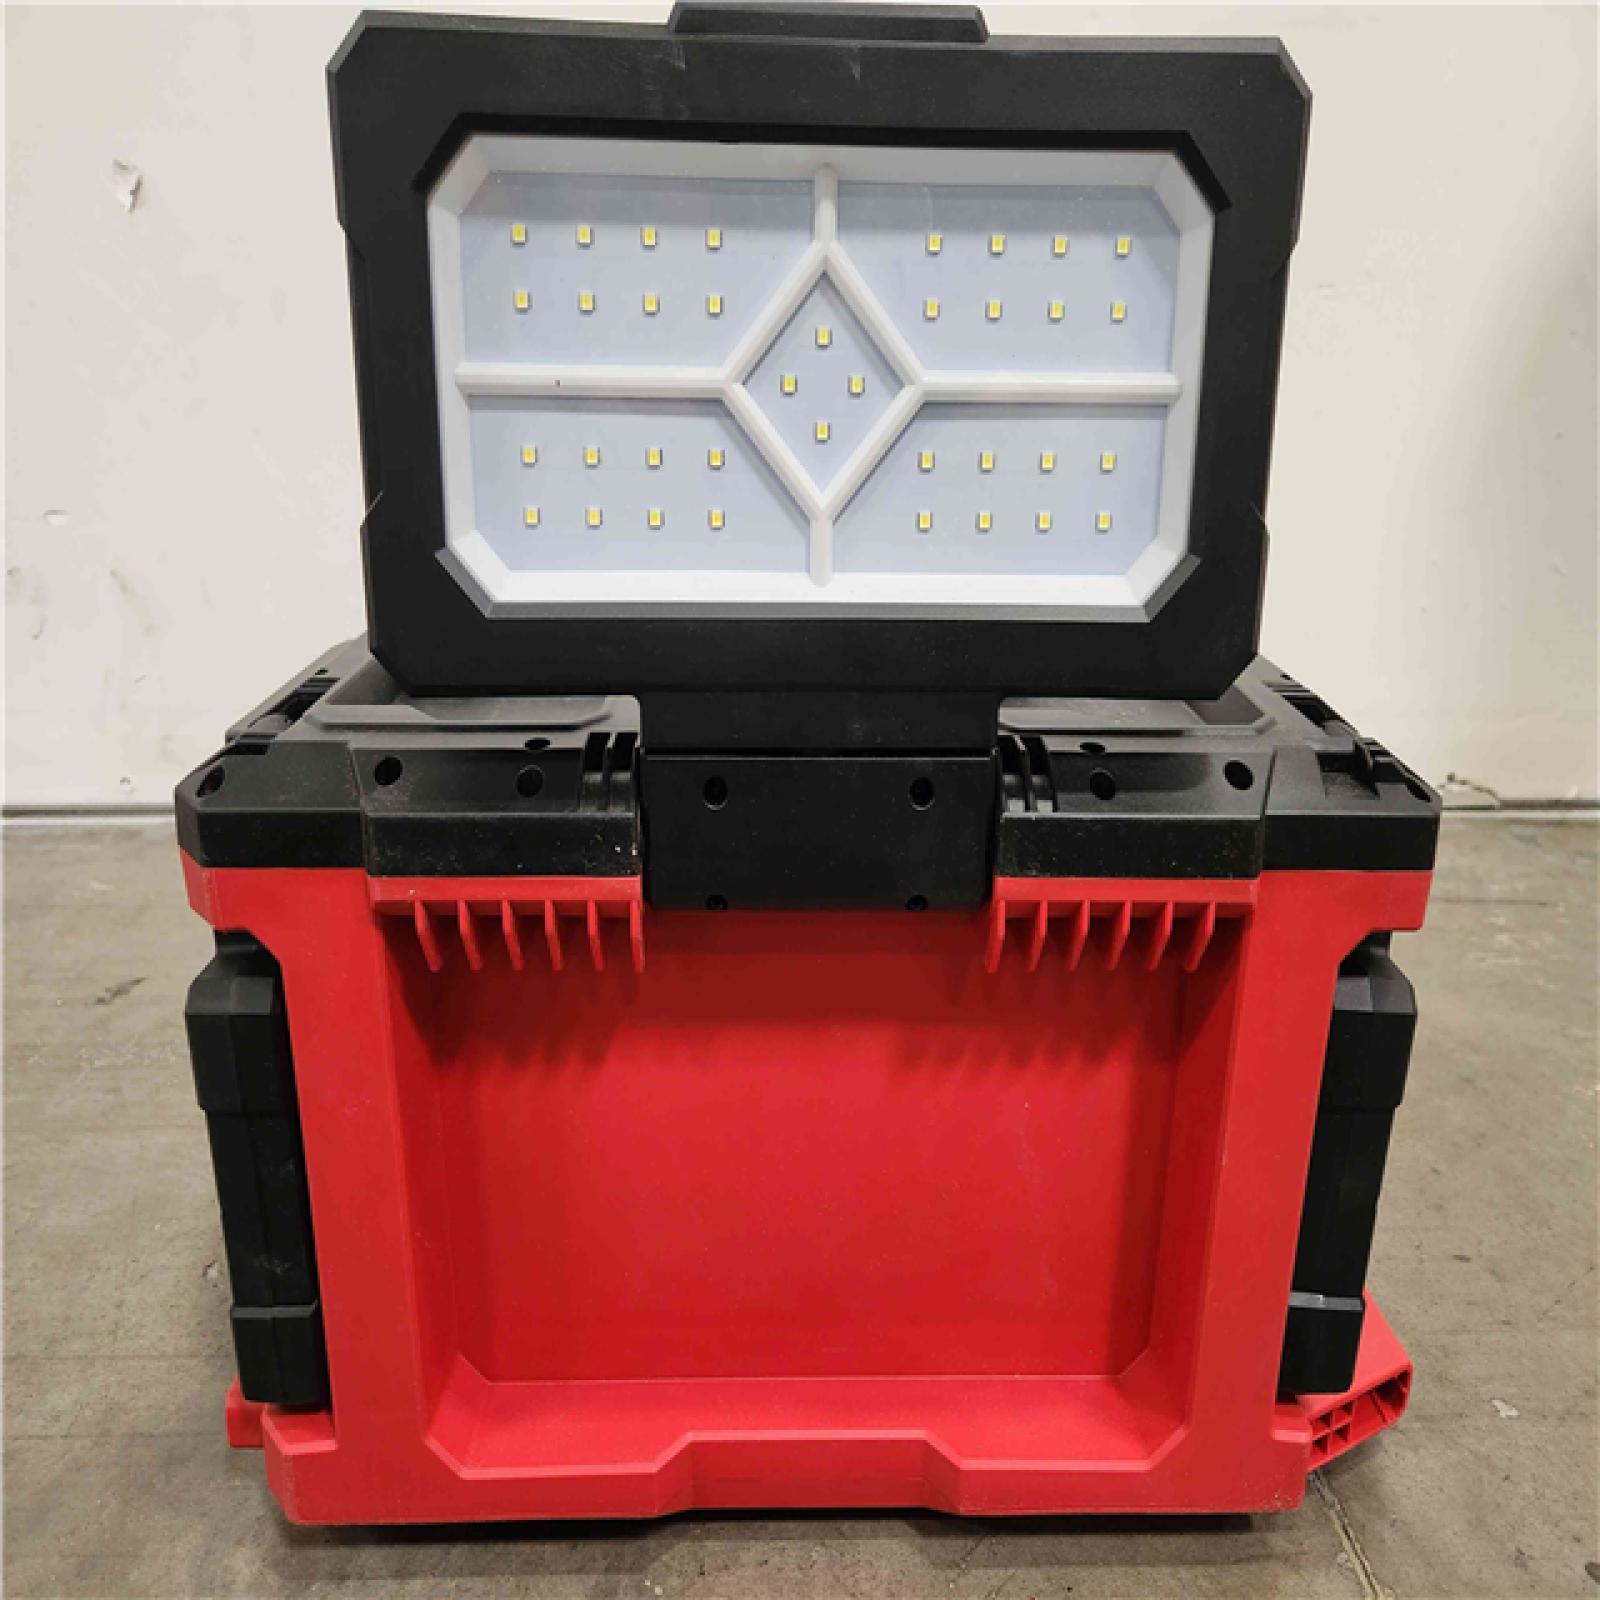 Phoenix Location NEW Milwaukee M18 18-Volt Lithium-Ion Cordless PACKOUT 3000 Lumens LED Light with Built-In Charger 2357-20